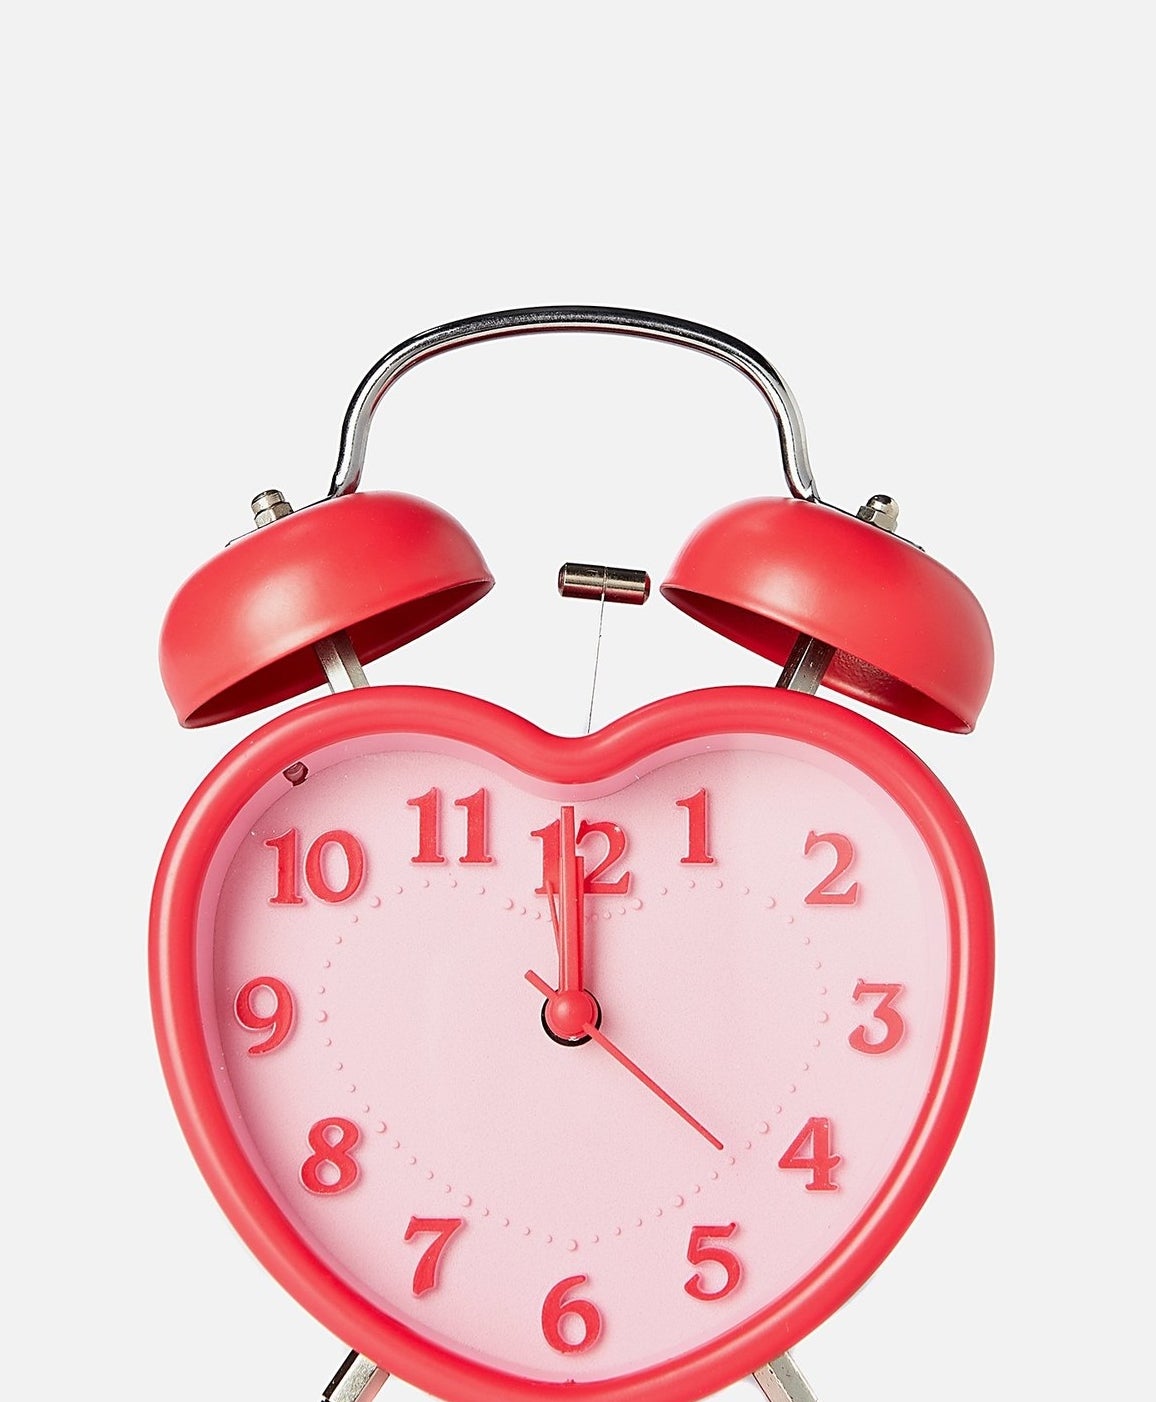 old-school alarm clock. you're sure to love, and that's saying so...